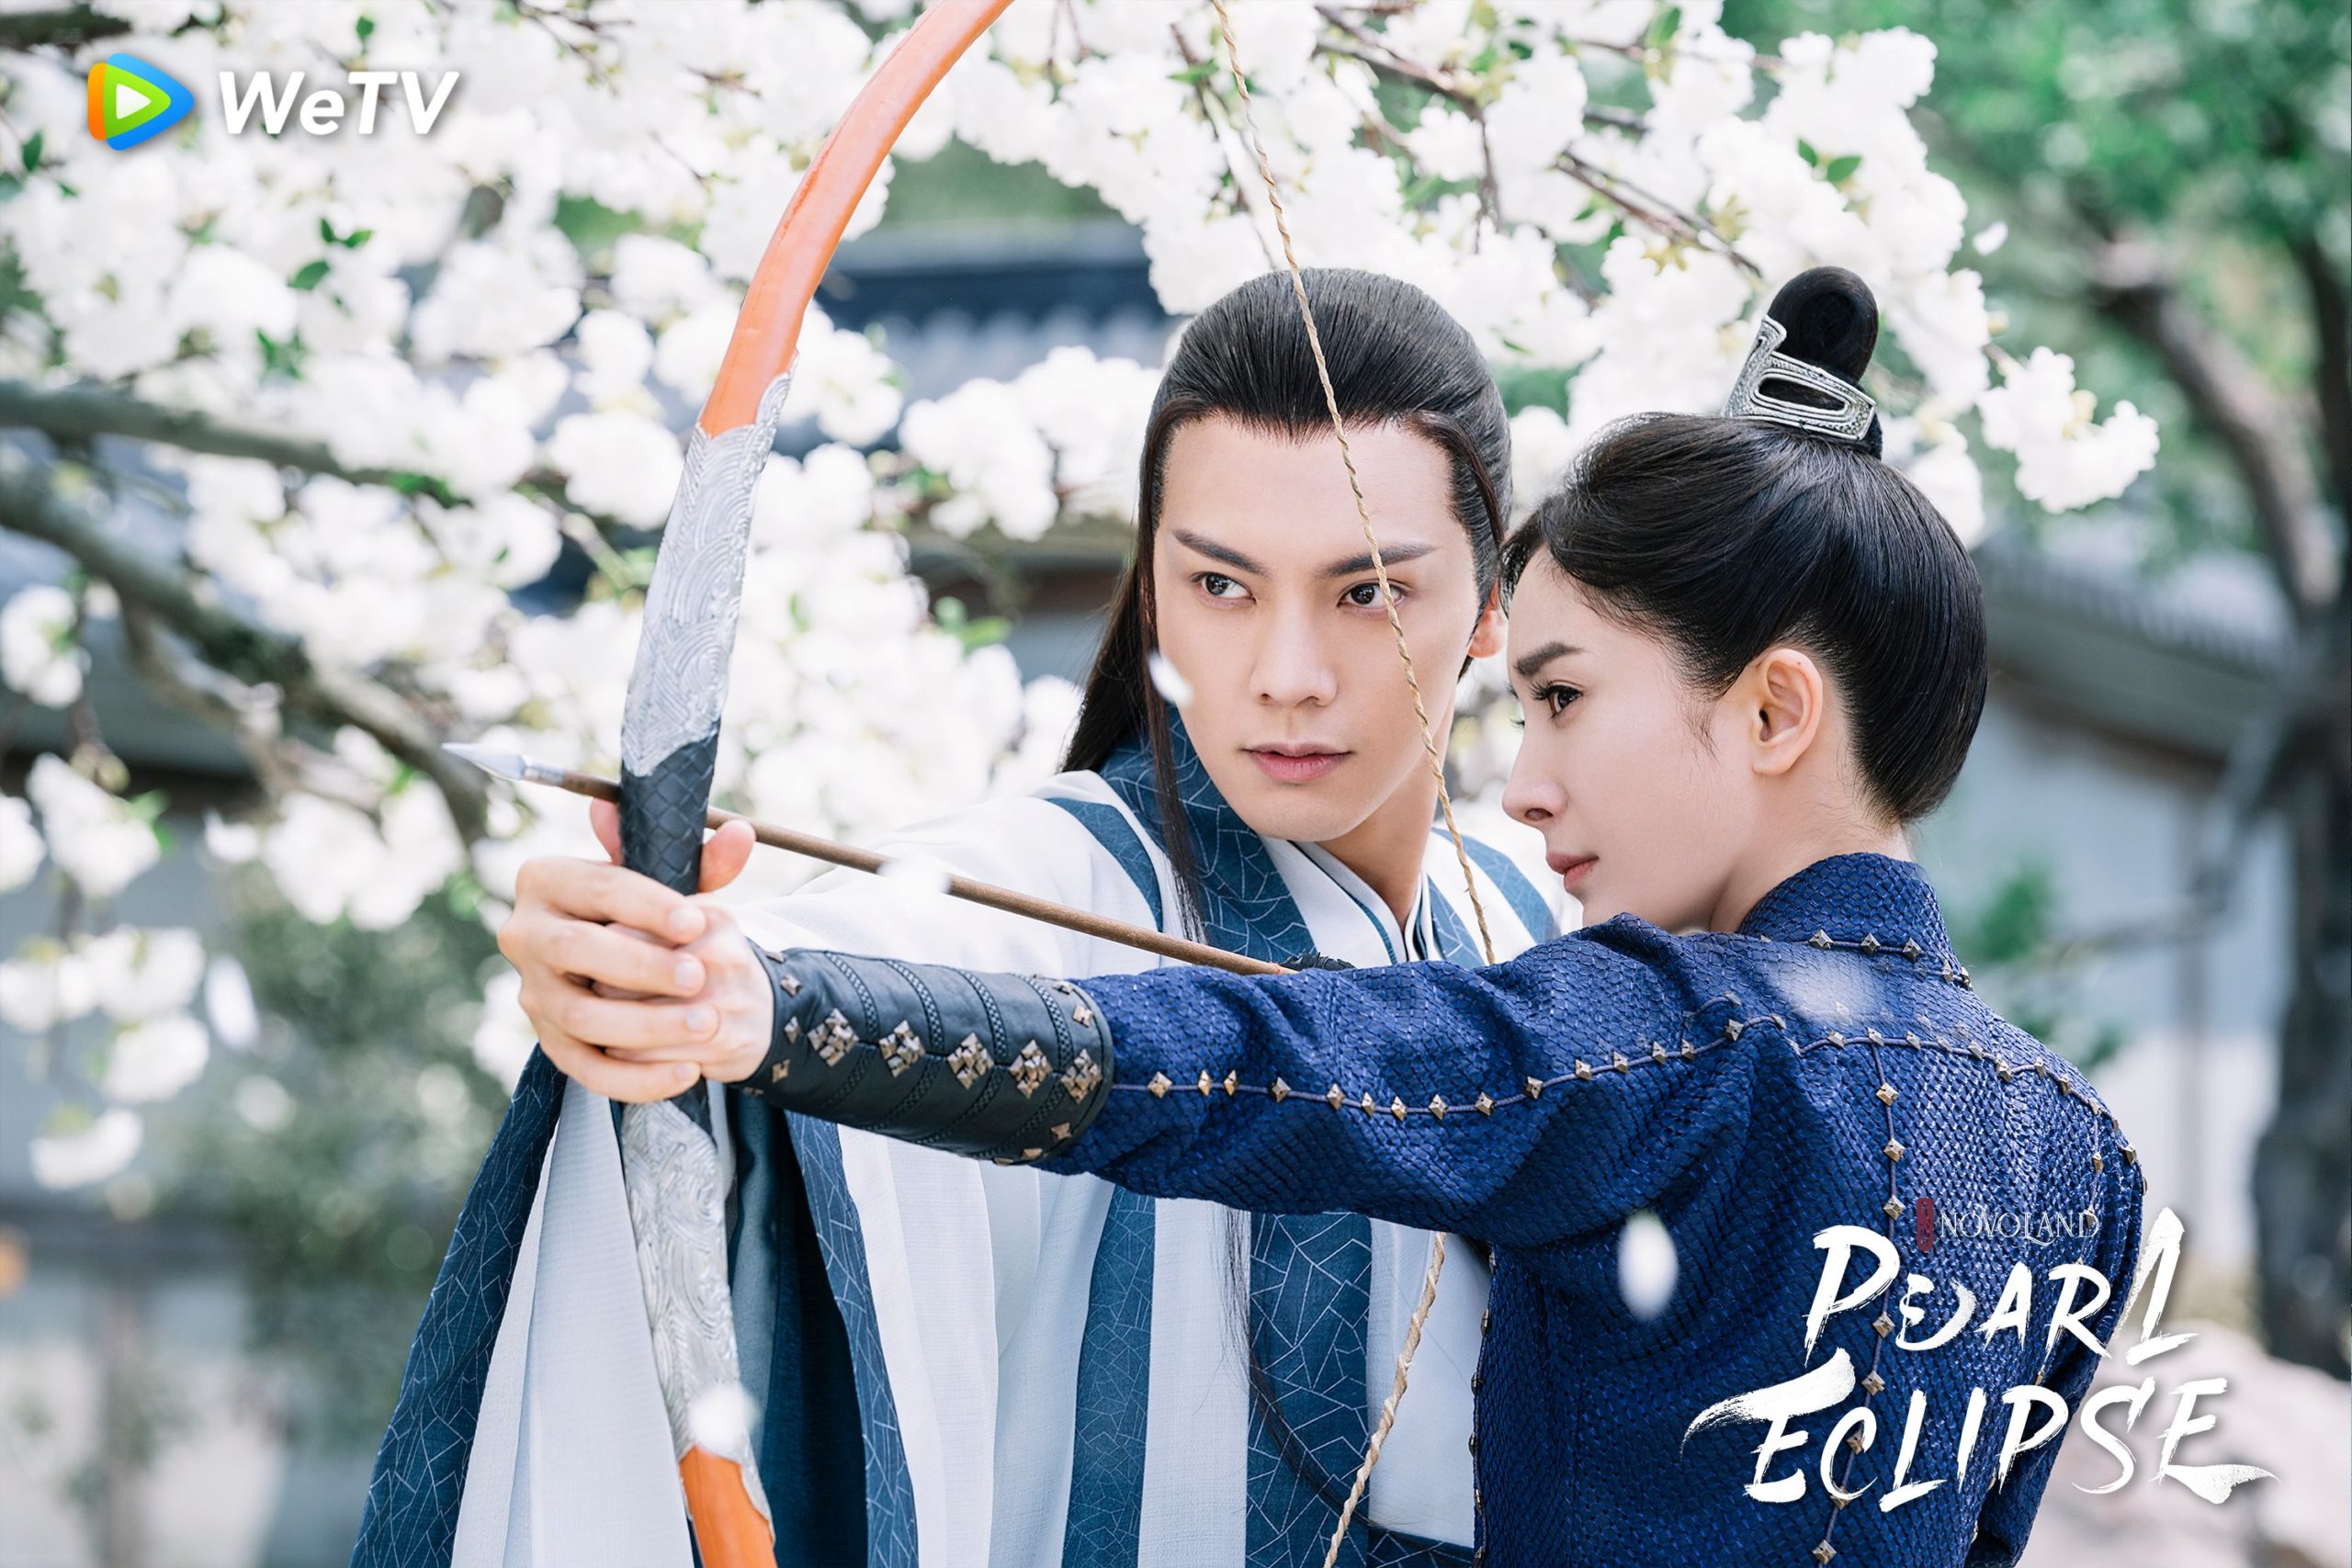 Novoland Pearl Eclipse Review Chinese Historical Romance Drama